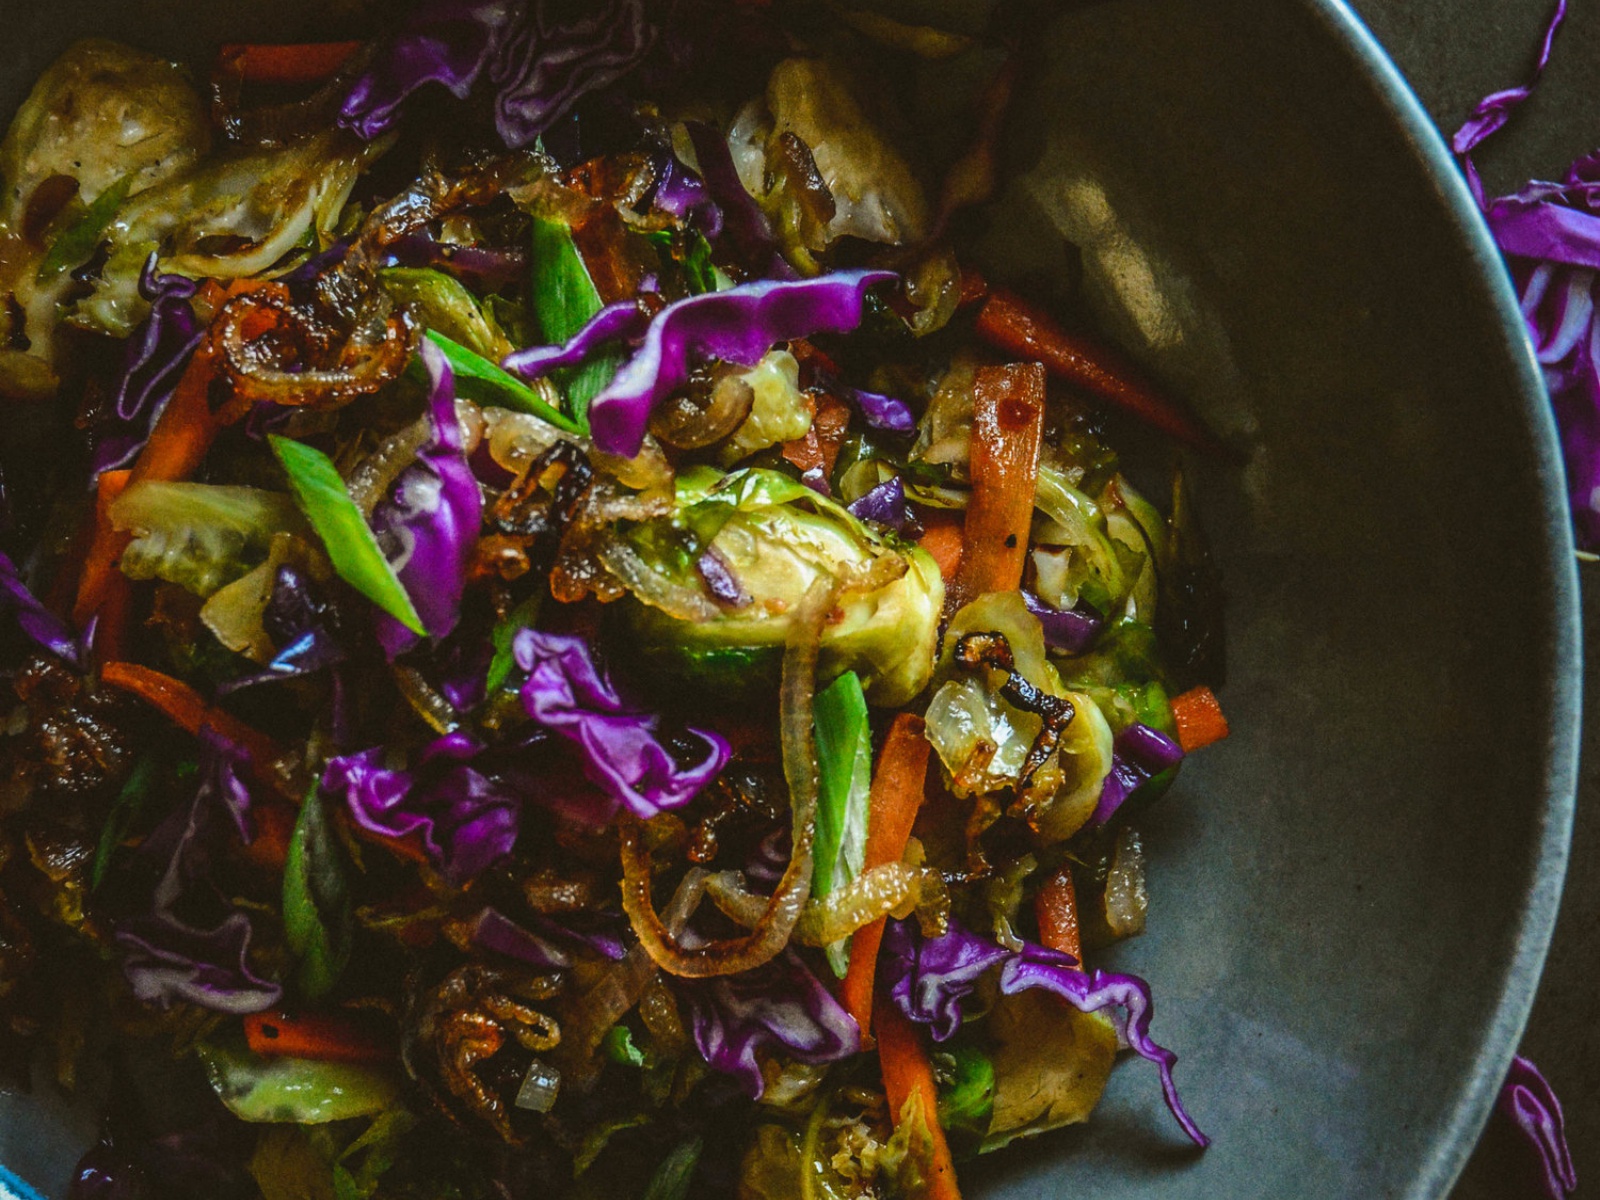 Delicious and colorful veggie filled salad with sweet chili sauce